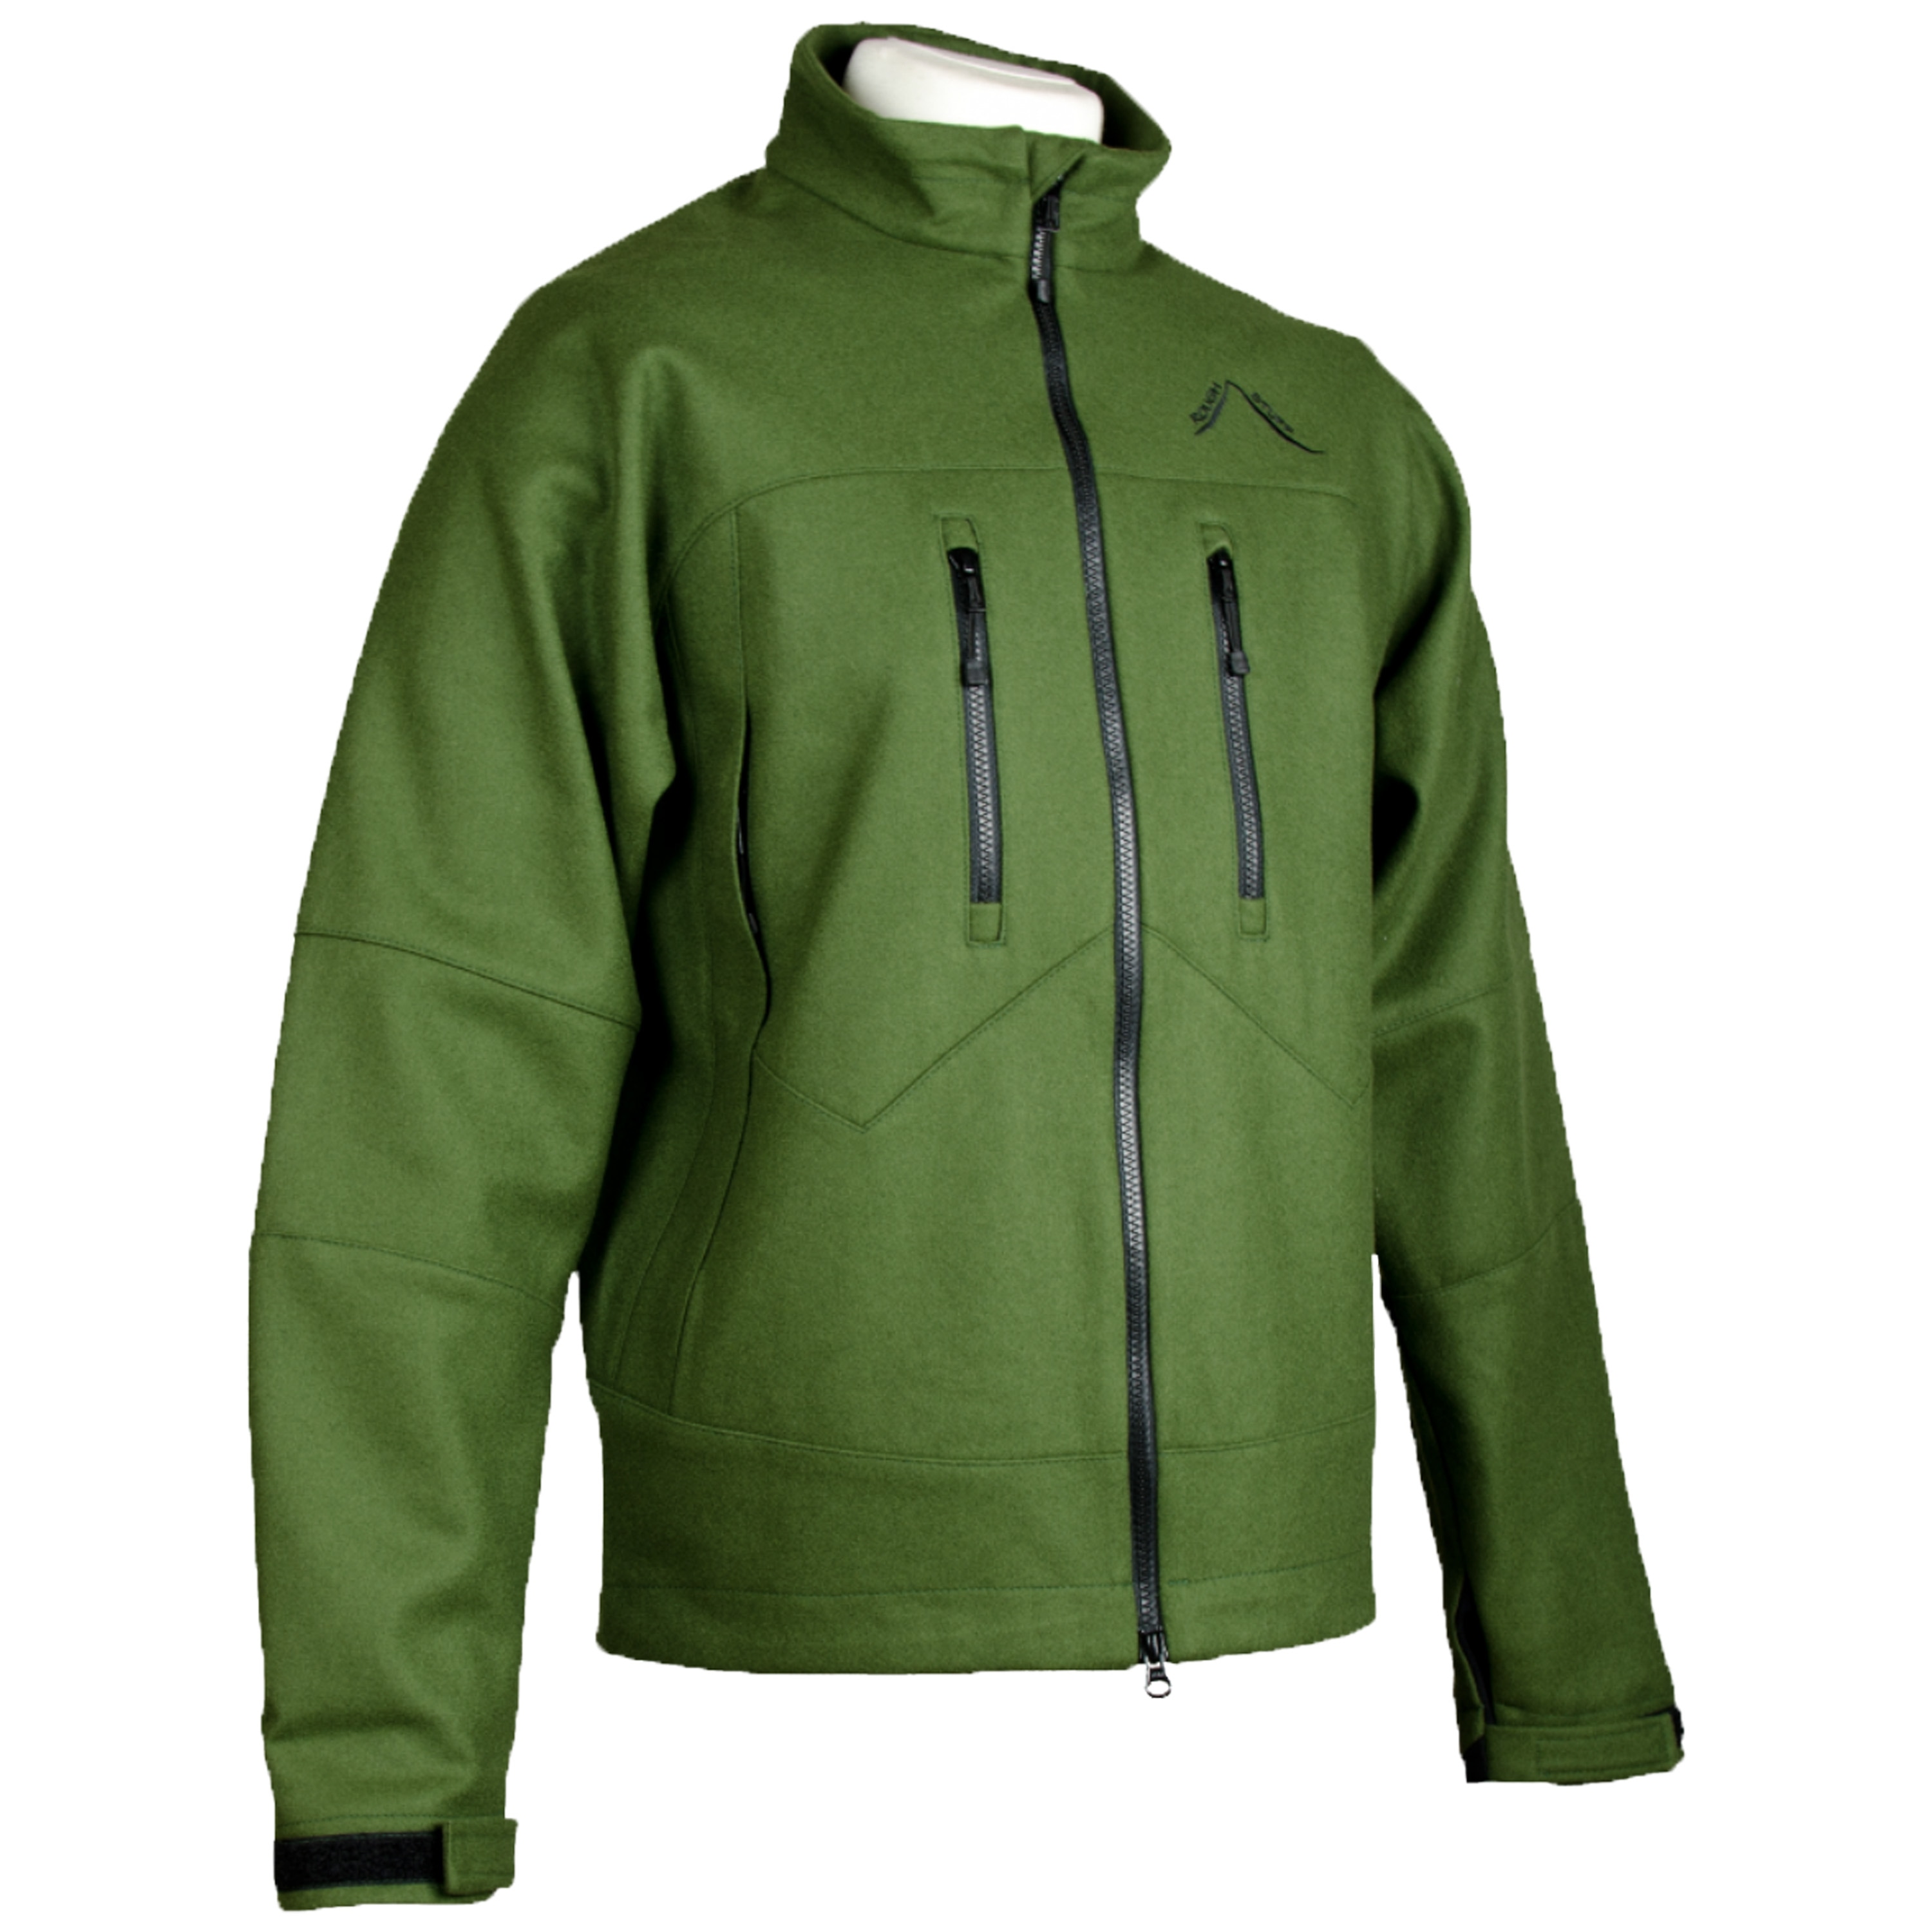 Purchase the Rough Stuff Loden Jacket Deubelskerl w/o Hood green